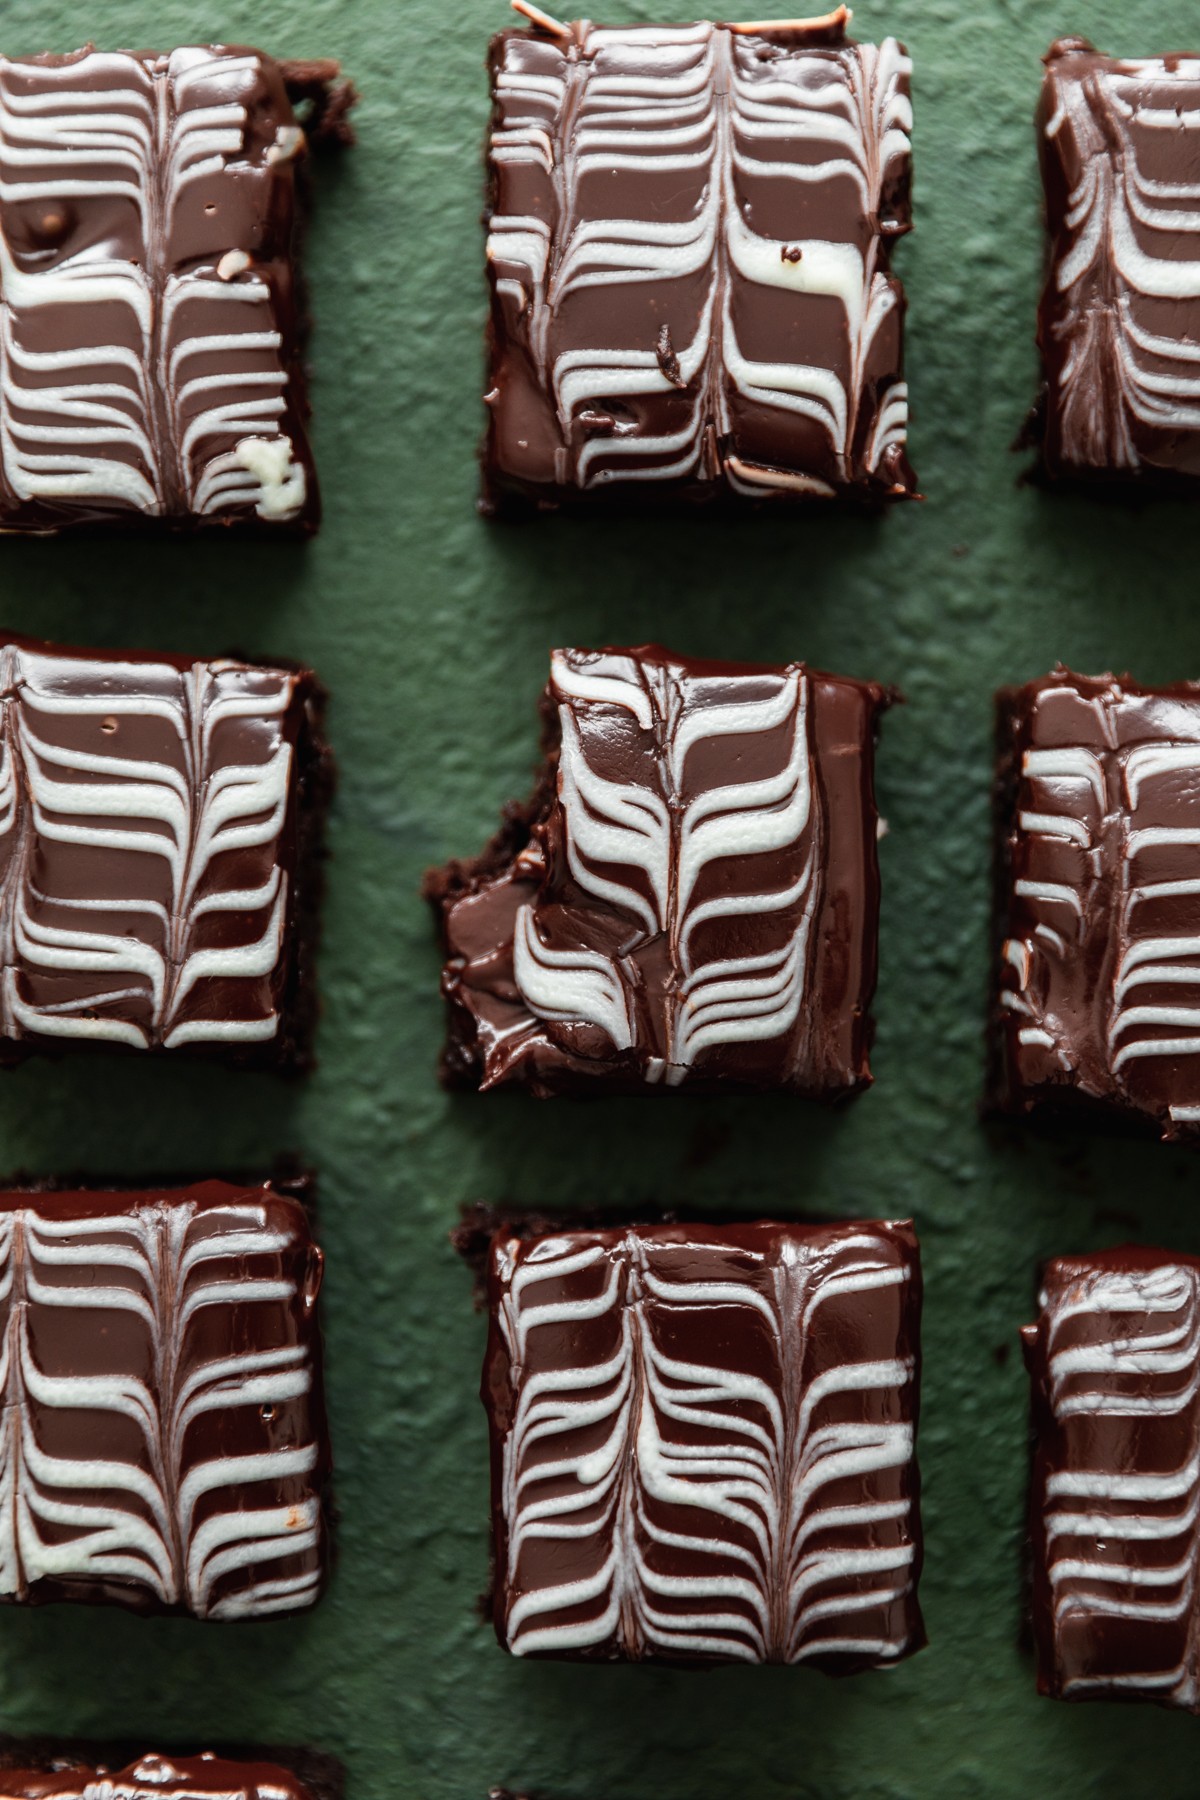 An overhead image of rows of brownies on a dark green background, with a bite taken out of the middle brownie.